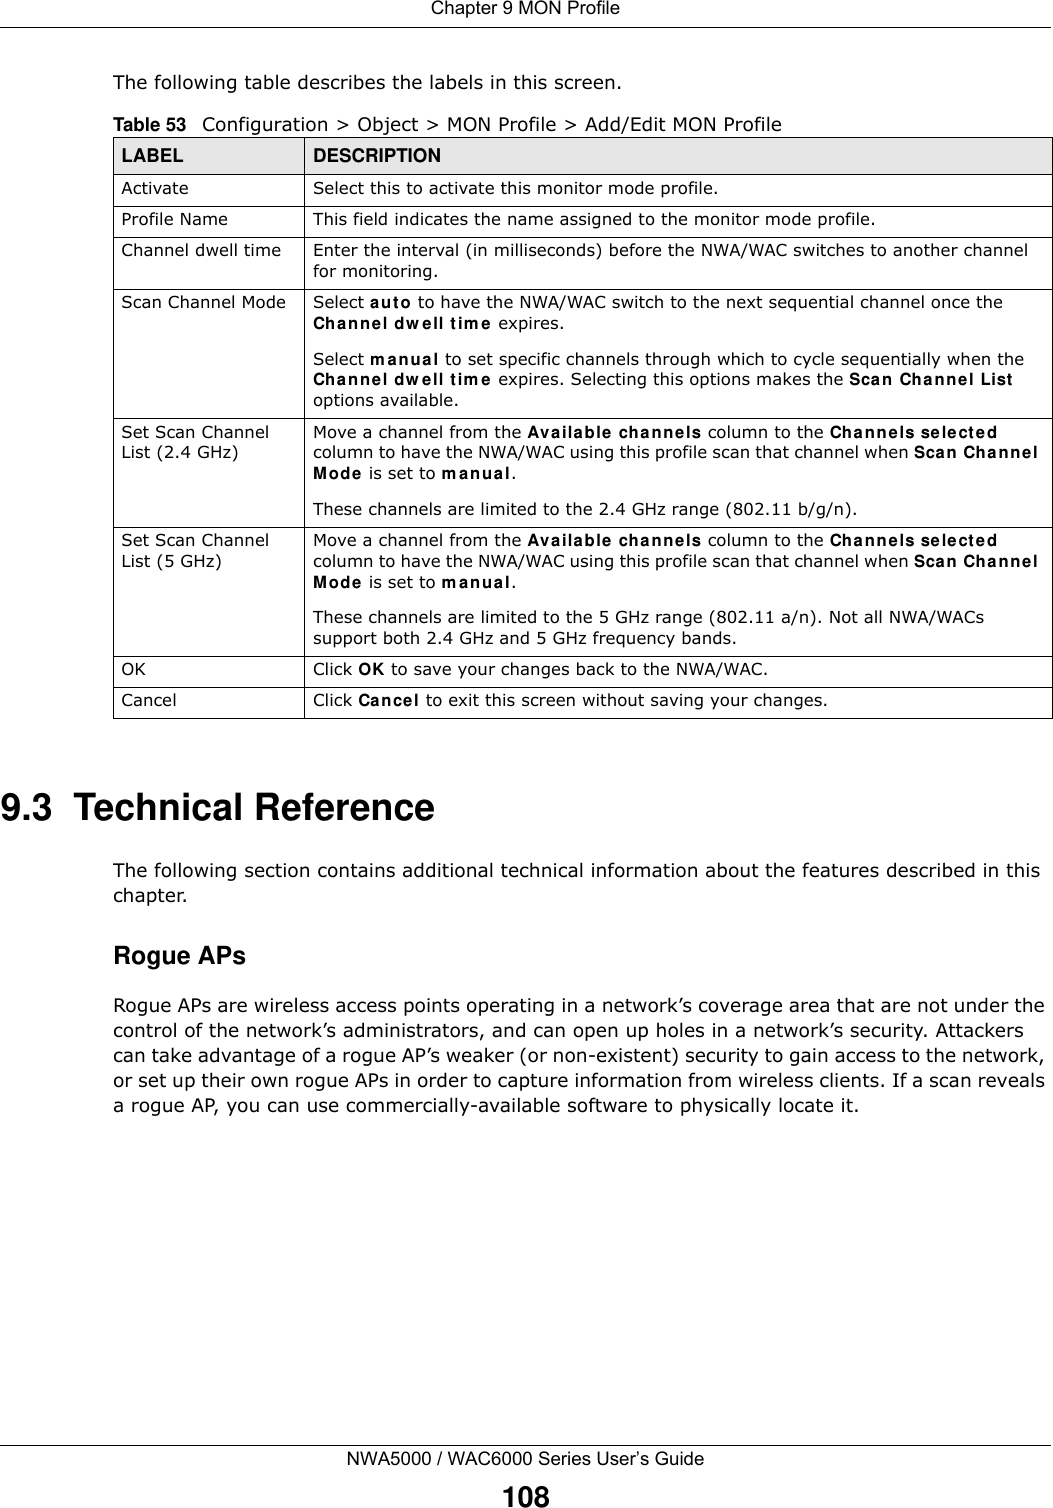 Chapter 9 MON ProfileNWA5000 / WAC6000 Series User’s Guide108The following table describes the labels in this screen.  9.3  Technical ReferenceThe following section contains additional technical information about the features described in this chapter.Rogue APsRogue APs are wireless access points operating in a network’s coverage area that are not under the control of the network’s administrators, and can open up holes in a network’s security. Attackers can take advantage of a rogue AP’s weaker (or non-existent) security to gain access to the network, or set up their own rogue APs in order to capture information from wireless clients. If a scan reveals a rogue AP, you can use commercially-available software to physically locate it.Table 53   Configuration &gt; Object &gt; MON Profile &gt; Add/Edit MON ProfileLABEL DESCRIPTIONActivate Select this to activate this monitor mode profile.Profile Name This field indicates the name assigned to the monitor mode profile.Channel dwell time Enter the interval (in milliseconds) before the NWA/WAC switches to another channel for monitoring.Scan Channel Mode Select auto to have the NWA/WAC switch to the next sequential channel once the Channel dwell time expires.Select manual to set specific channels through which to cycle sequentially when the Channel dwell time expires. Selecting this options makes the Scan Channel List options available.Set Scan Channel List (2.4 GHz)Move a channel from the Available channels column to the Channels selected column to have the NWA/WAC using this profile scan that channel when Scan Channel Mode is set to manual.These channels are limited to the 2.4 GHz range (802.11 b/g/n).Set Scan Channel List (5 GHz)Move a channel from the Available channels column to the Channels selected column to have the NWA/WAC using this profile scan that channel when Scan Channel Mode is set to manual.These channels are limited to the 5 GHz range (802.11 a/n). Not all NWA/WACs support both 2.4 GHz and 5 GHz frequency bands.OK Click OK to save your changes back to the NWA/WAC.Cancel Click Cancel to exit this screen without saving your changes.